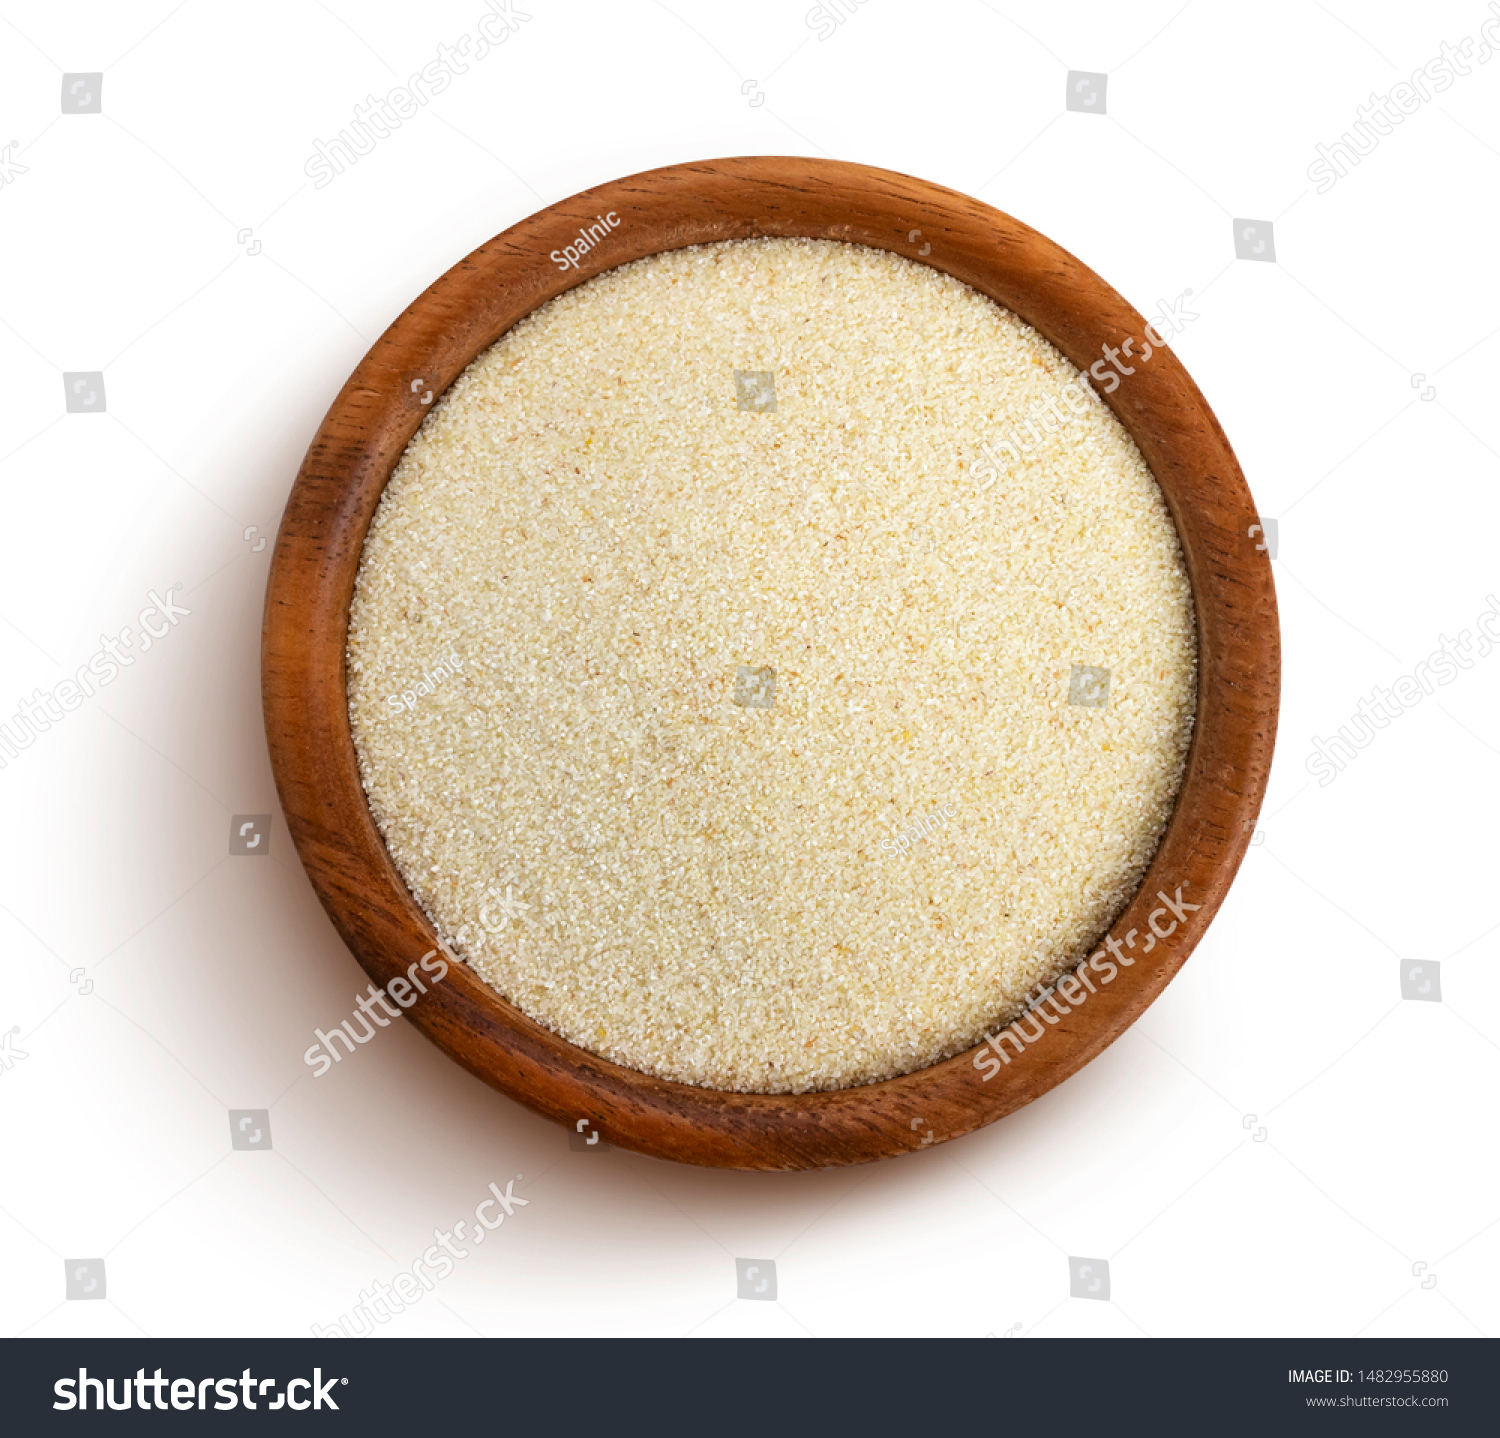 Semolina isolated on white background, raw semolina porridge in rustic wooden bowl, top view #1482955880